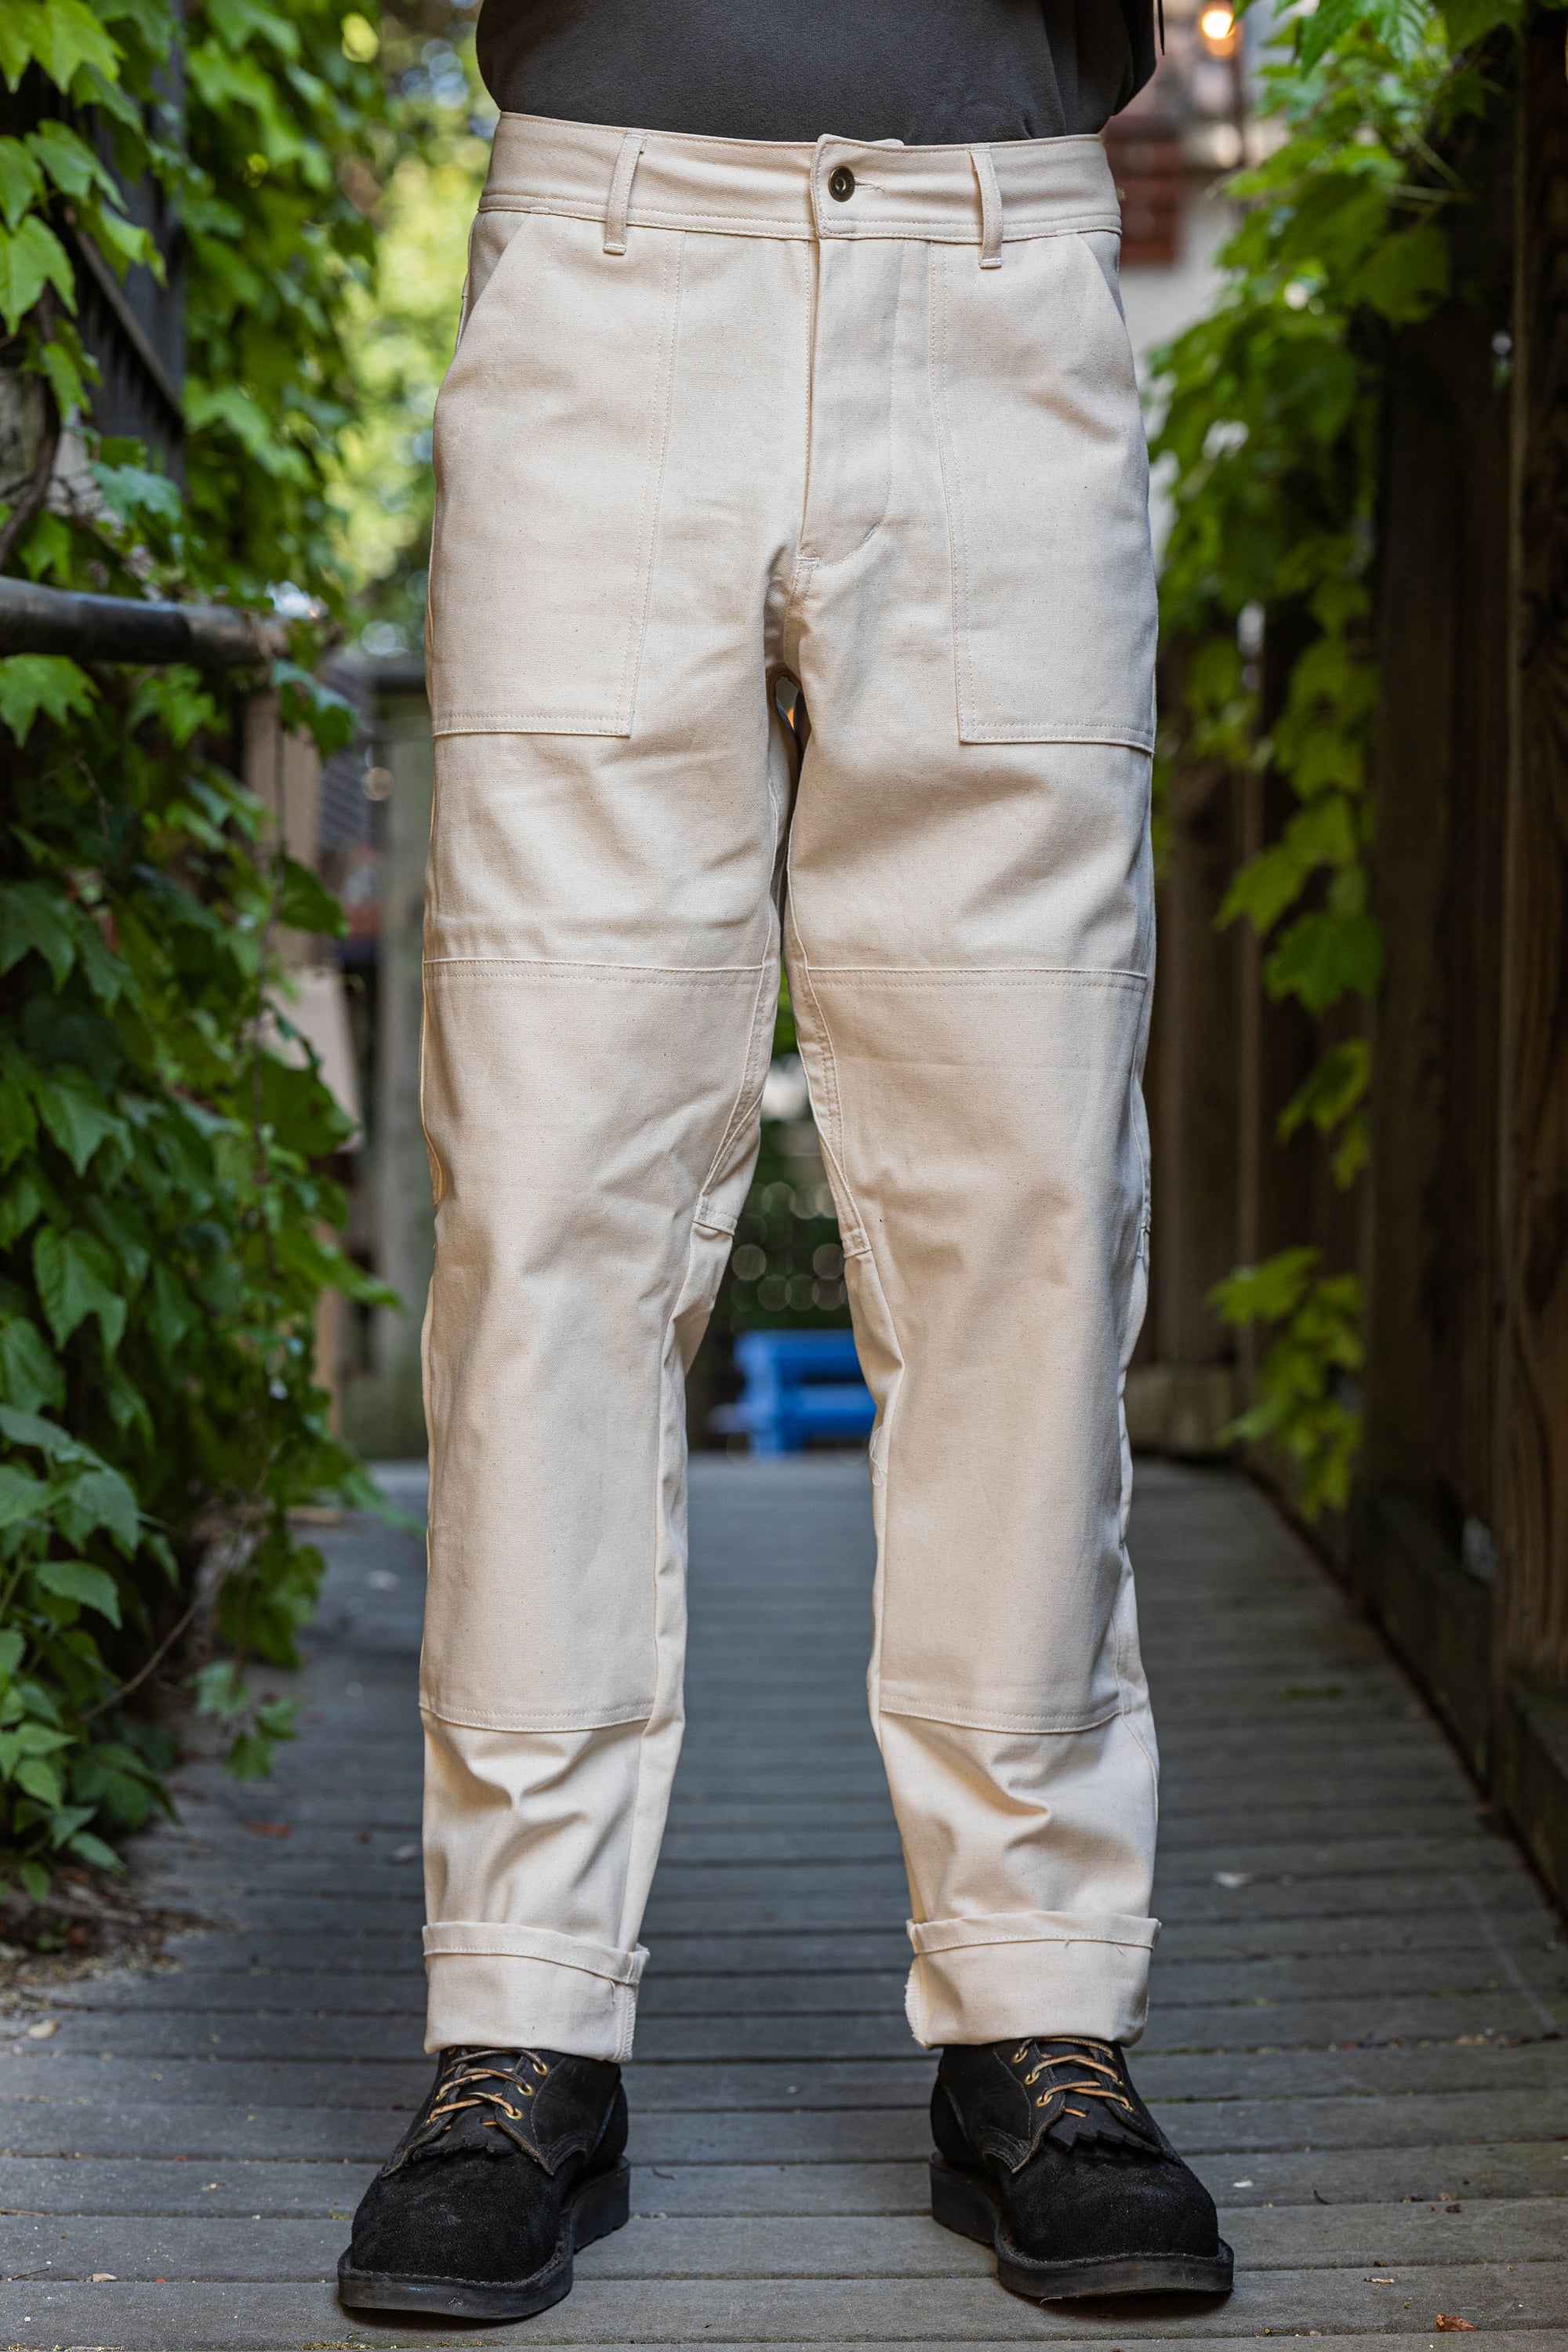 Carhartt WIP Double Knee Pants - buy at Blue Tomato